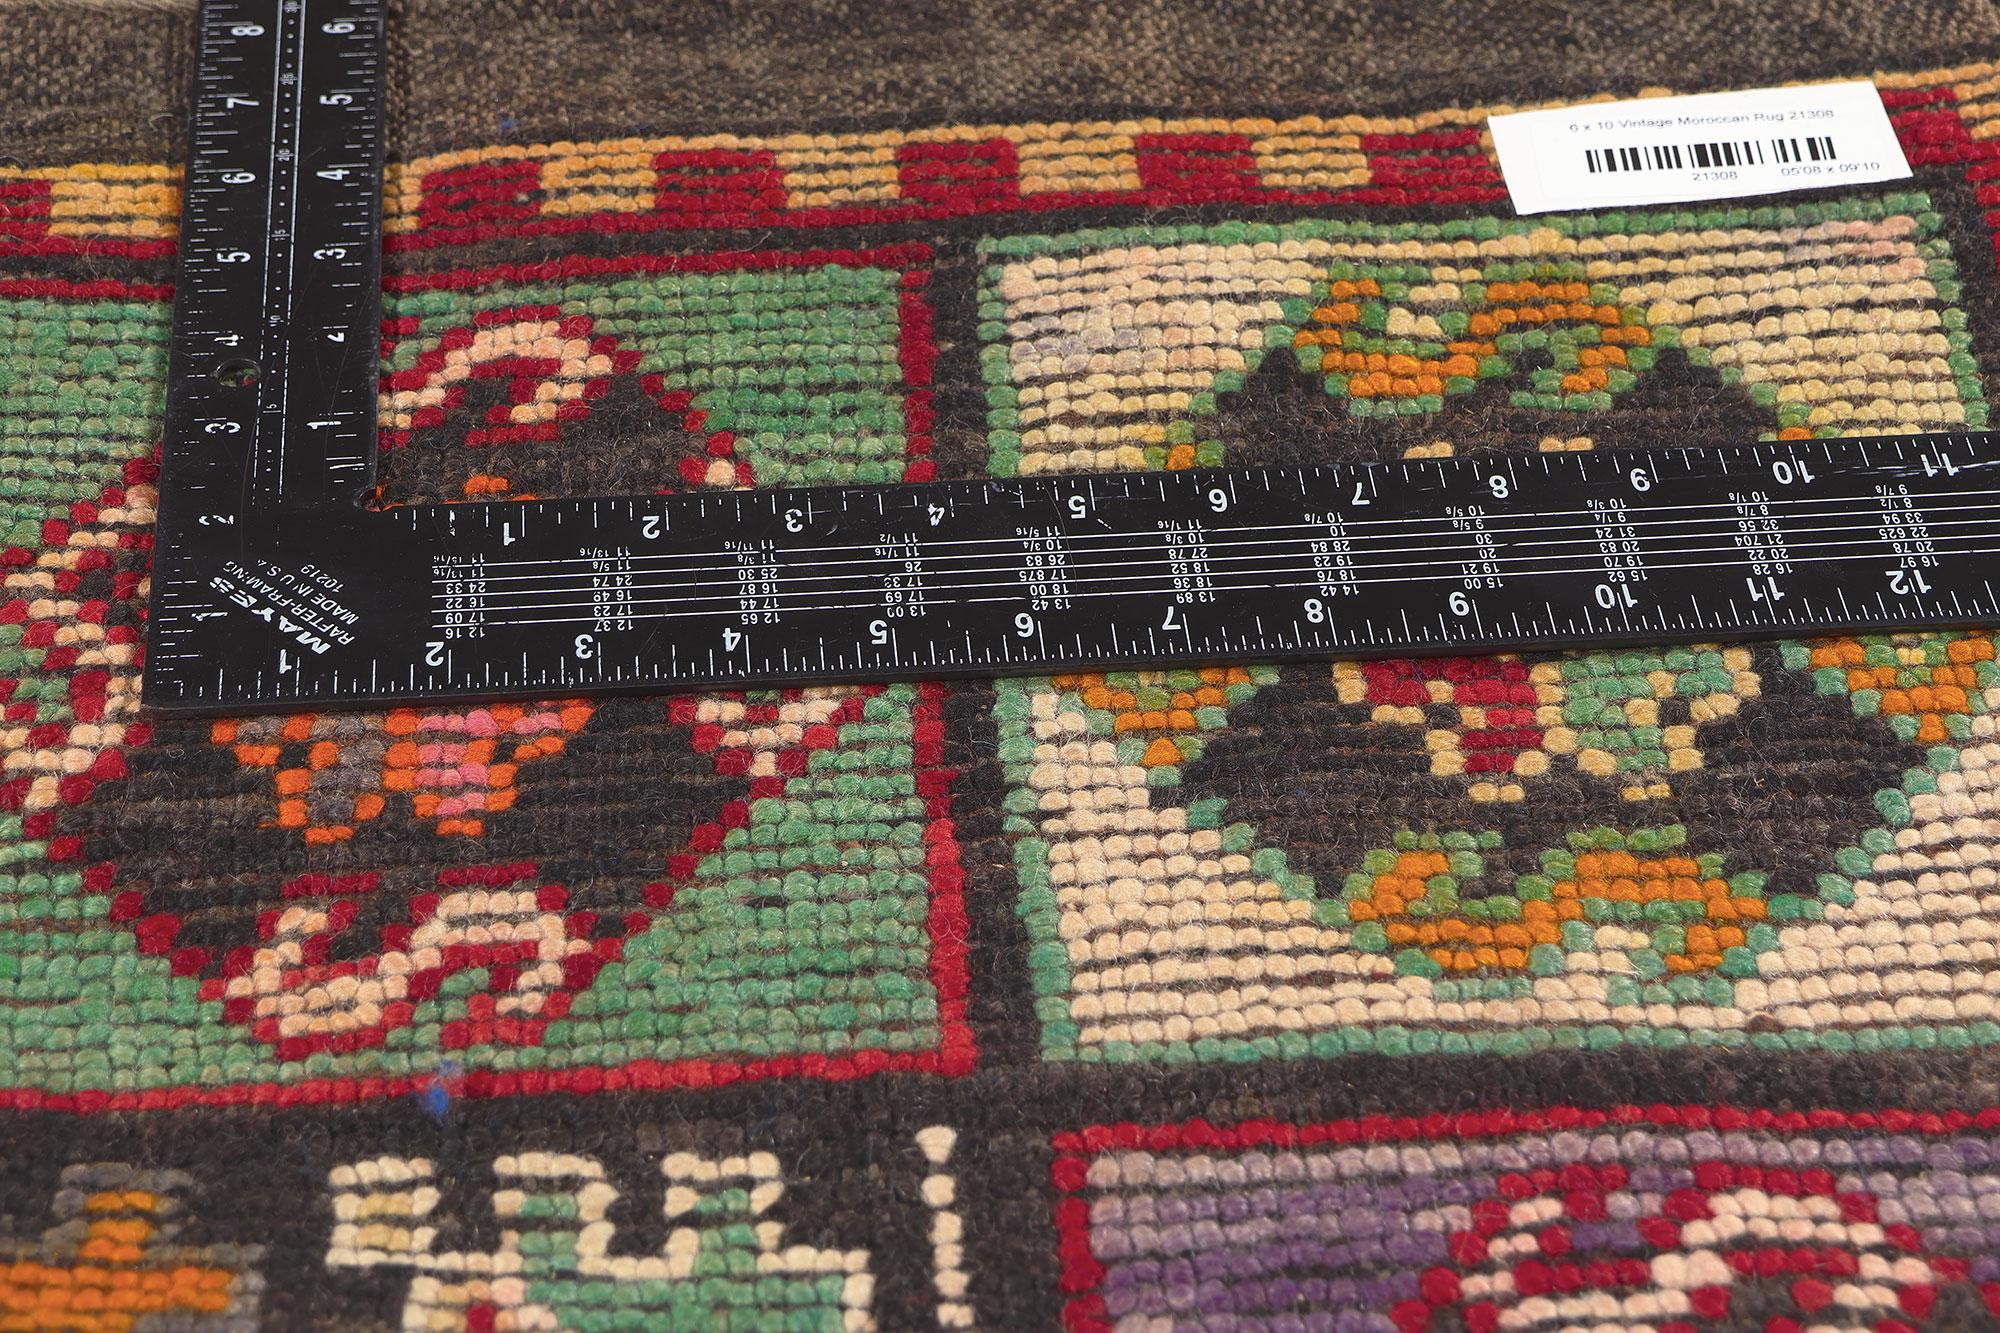 Vintage Boujad Moroccan Rug, Eclectic Jungalow Meets Colorful Boho In Good Condition For Sale In Dallas, TX